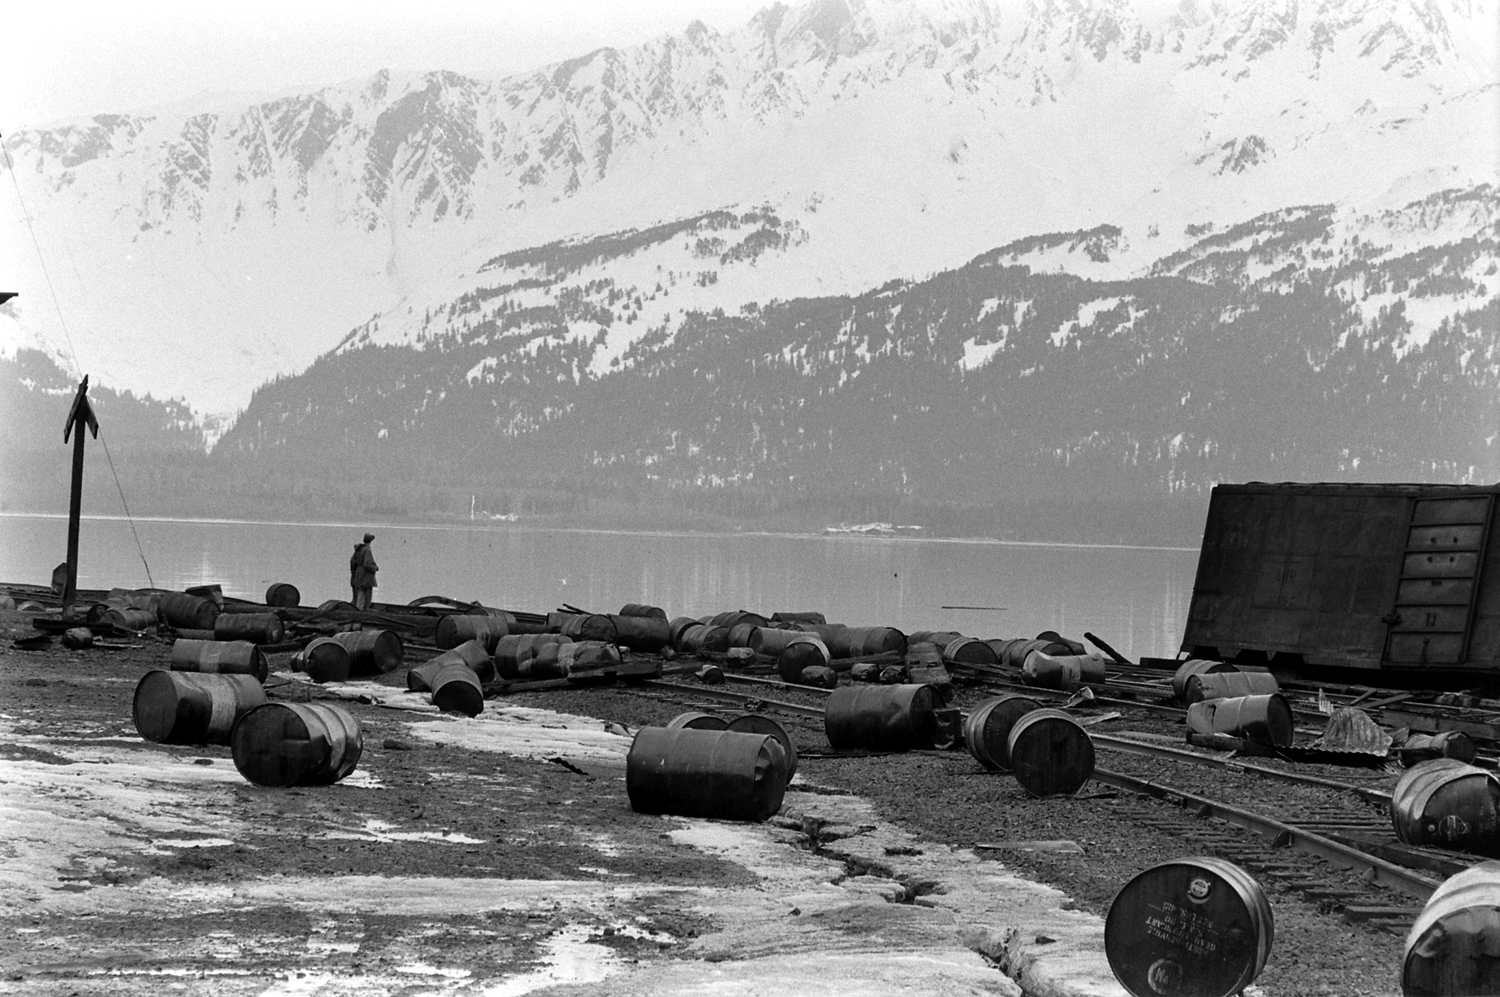 After the March 1964 Good Friday Earthquake, Alaska.